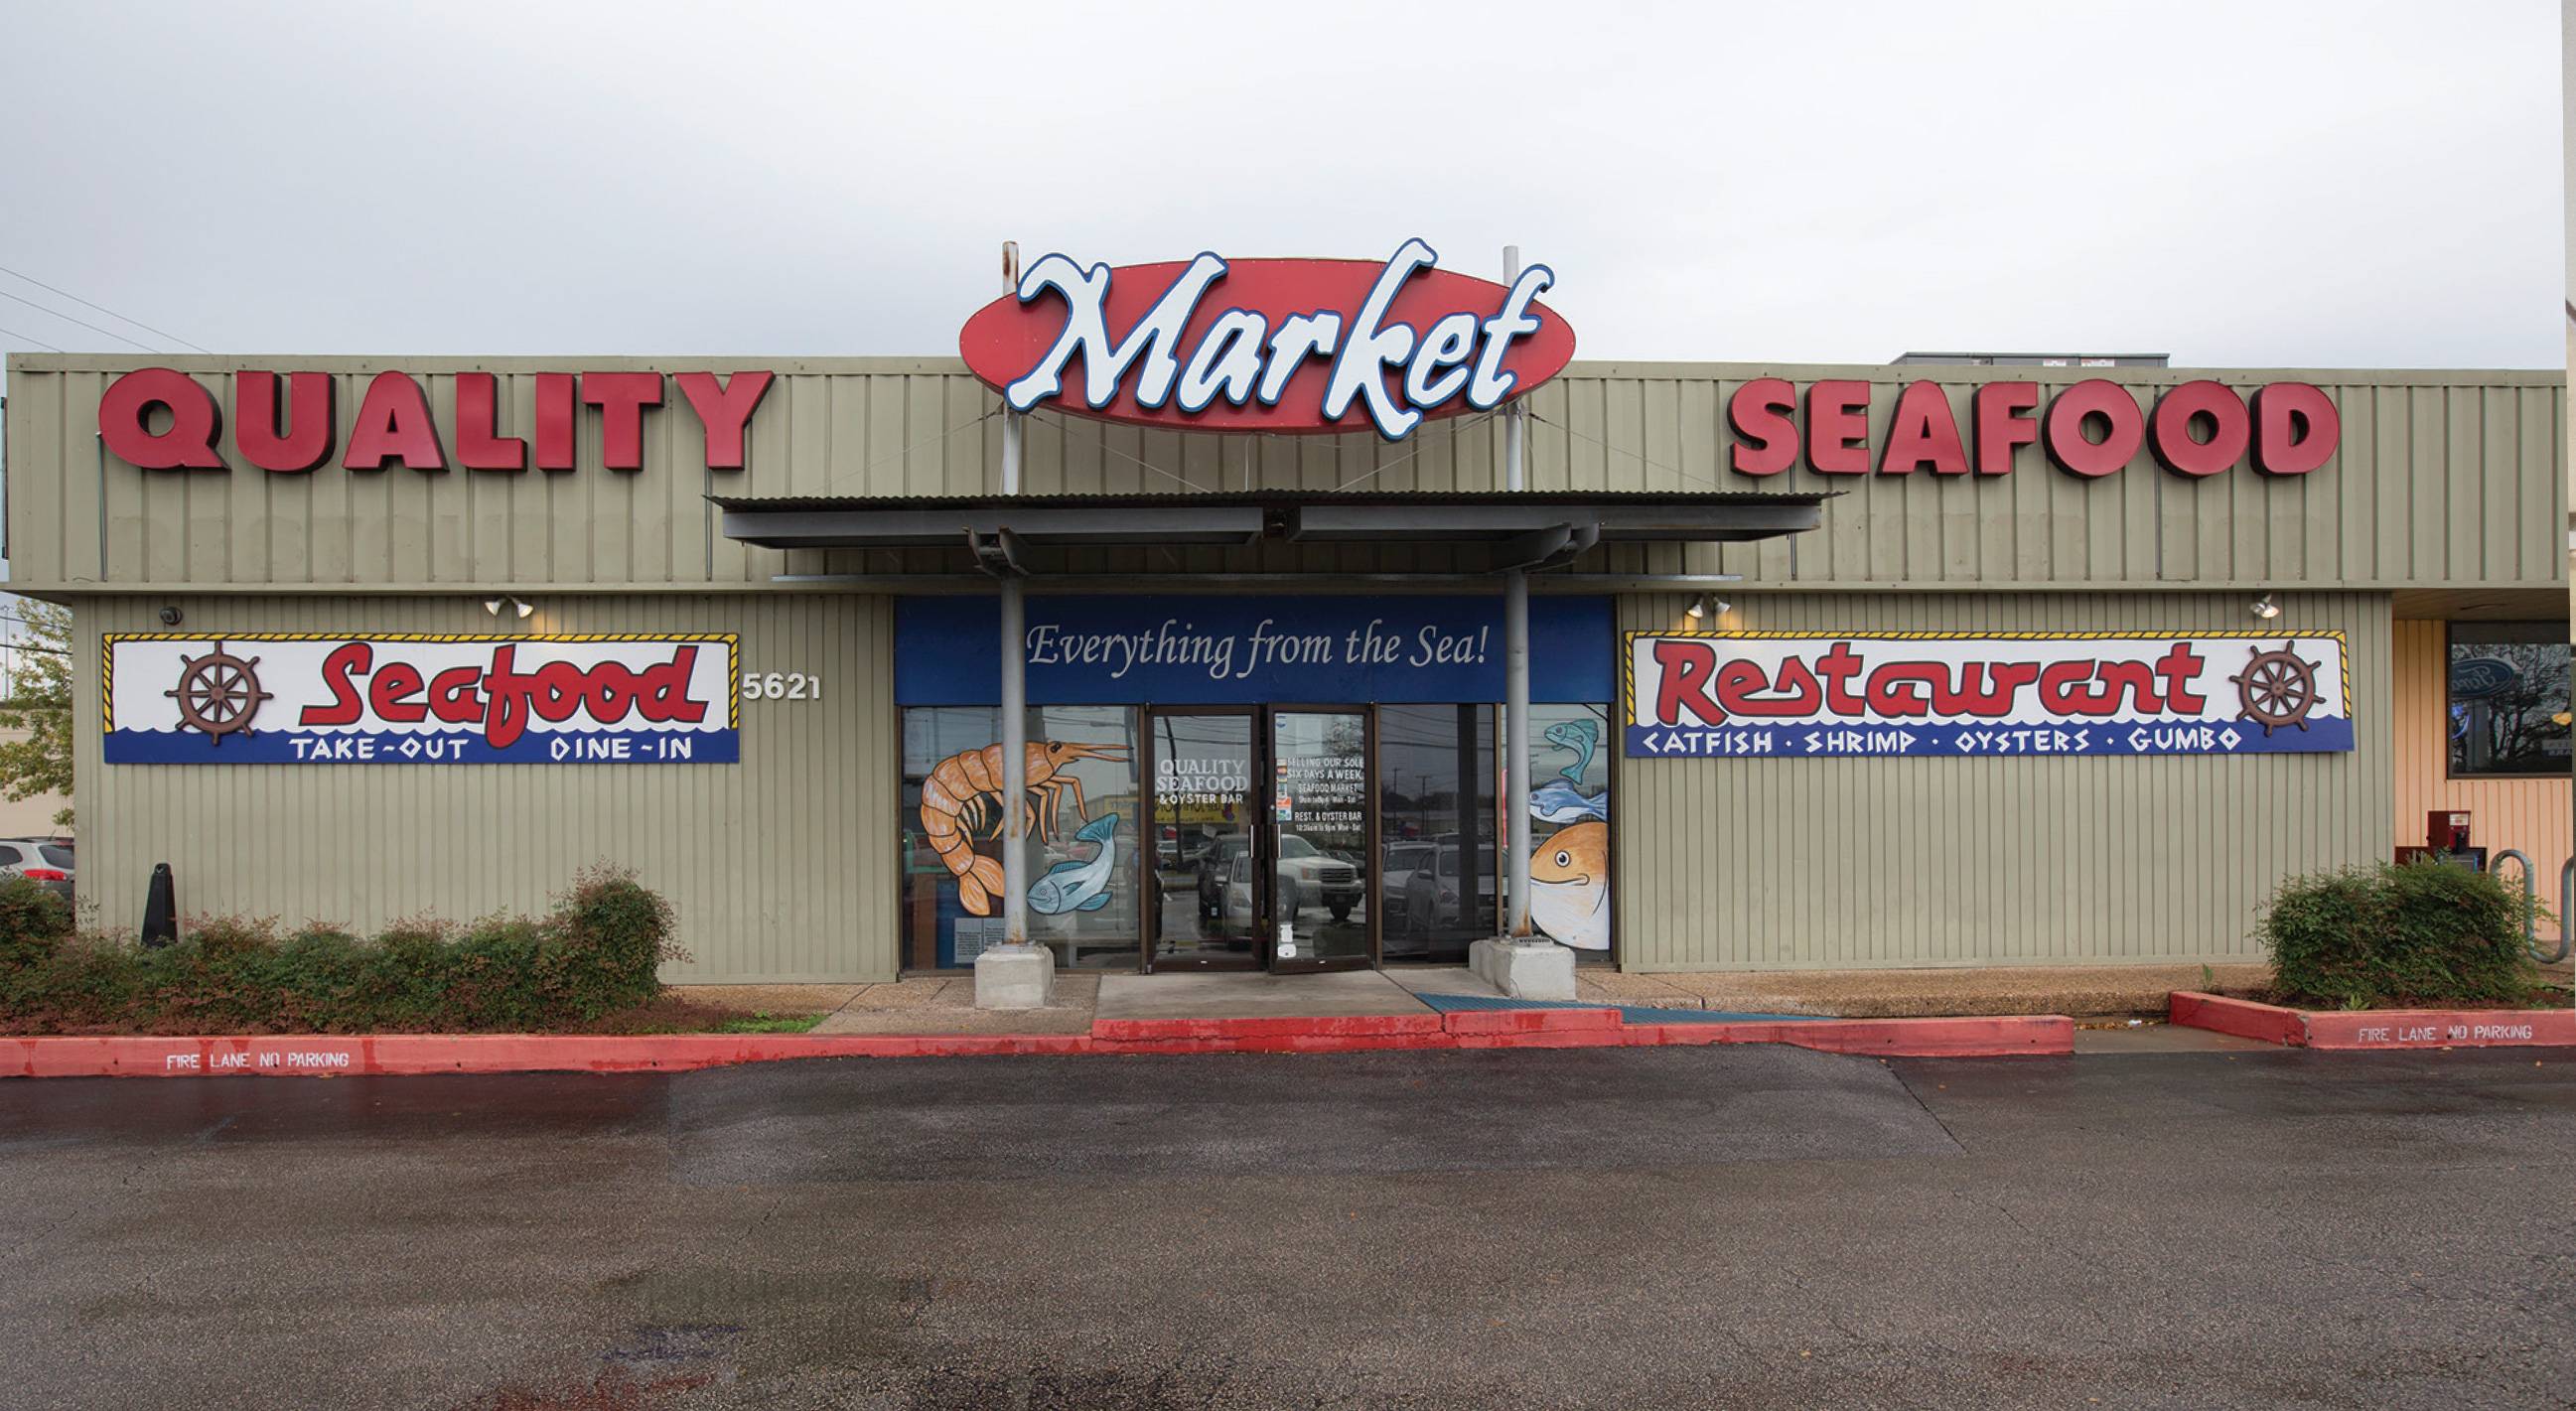 Storefront of Quality Seafood Market in Austin, Texas